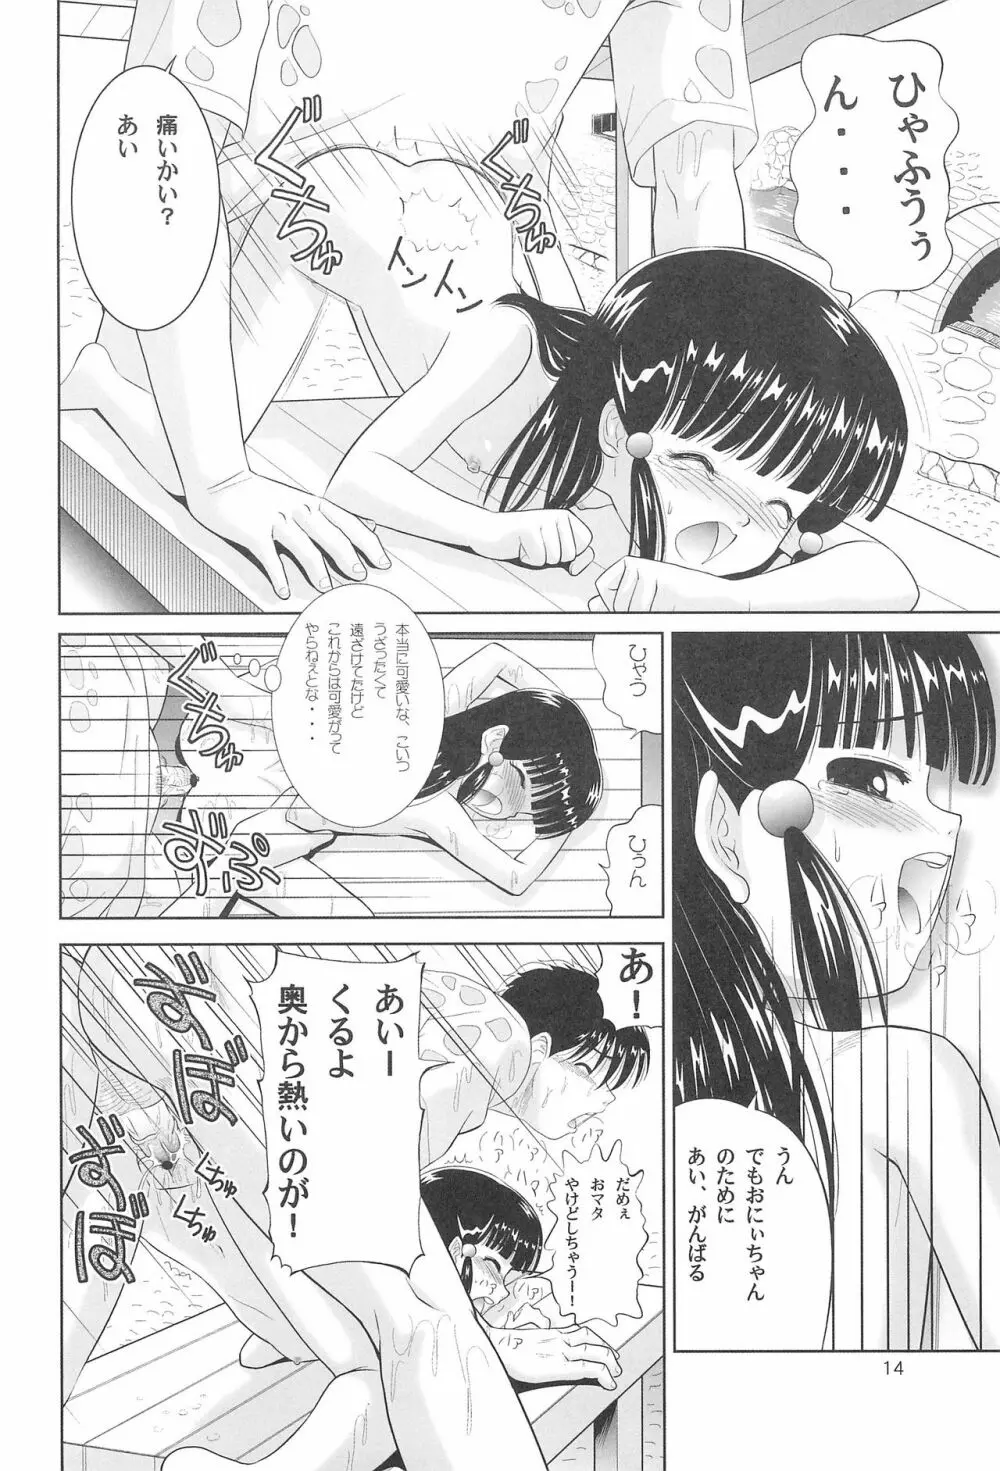 Little Lovers 6 - 水辺の少女 Page.13